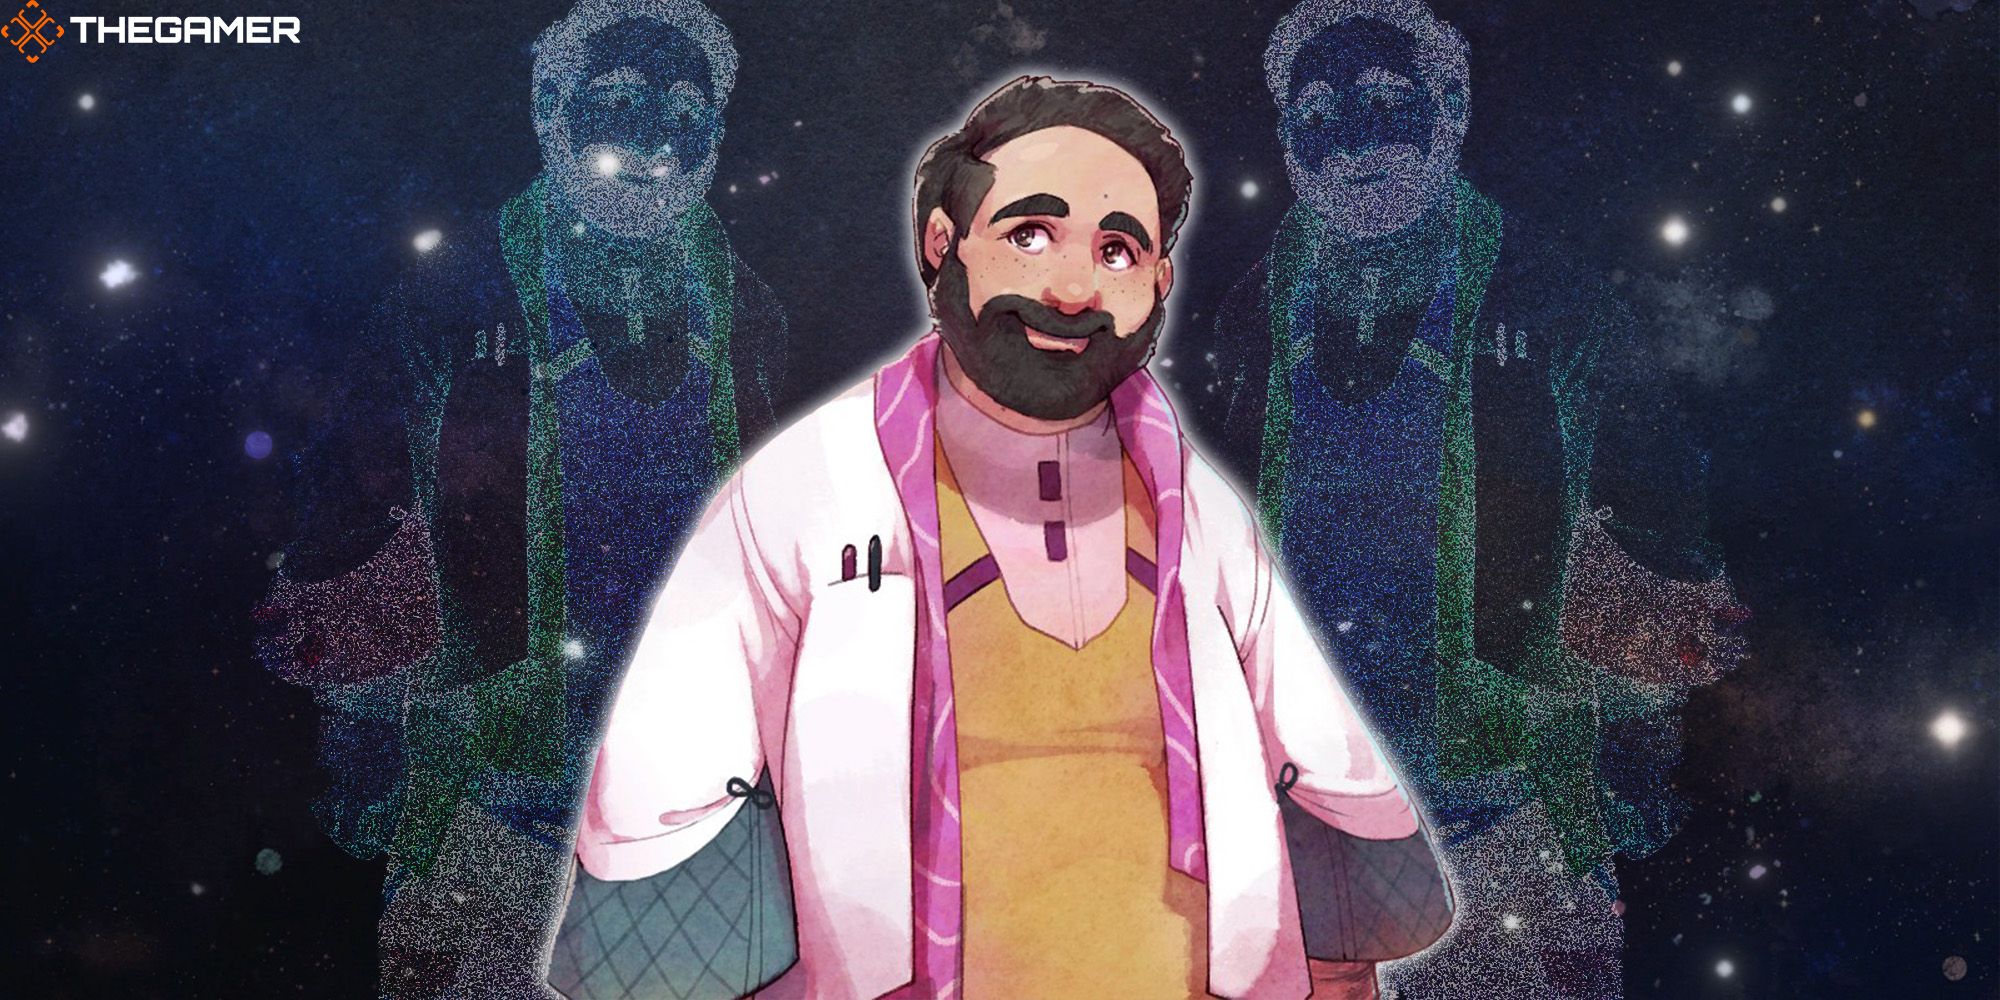 Professor Hal stands in a cosmic realm, alongside two shadows of himself, in this custom image for I Was A Teenage Exocolonist.